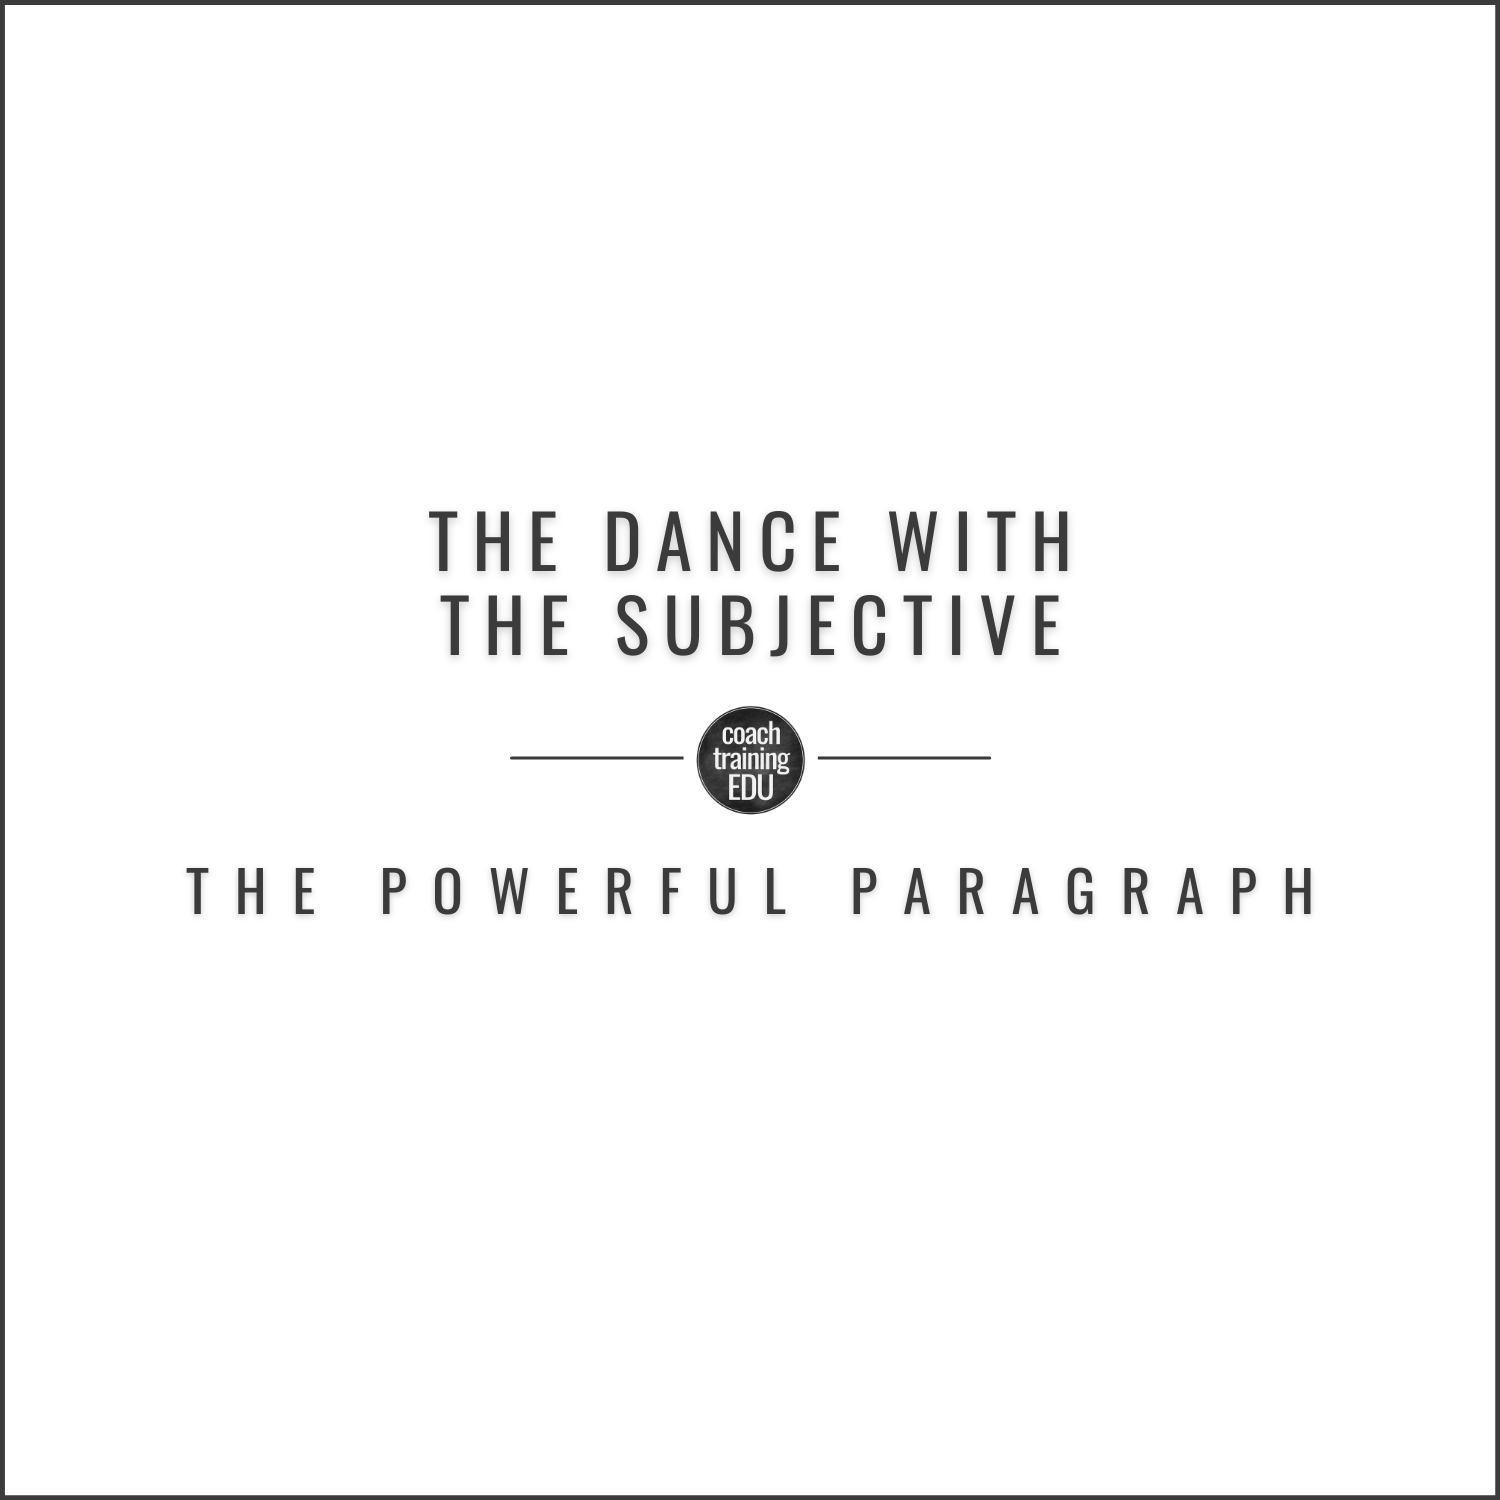 The Dance with the Subjective